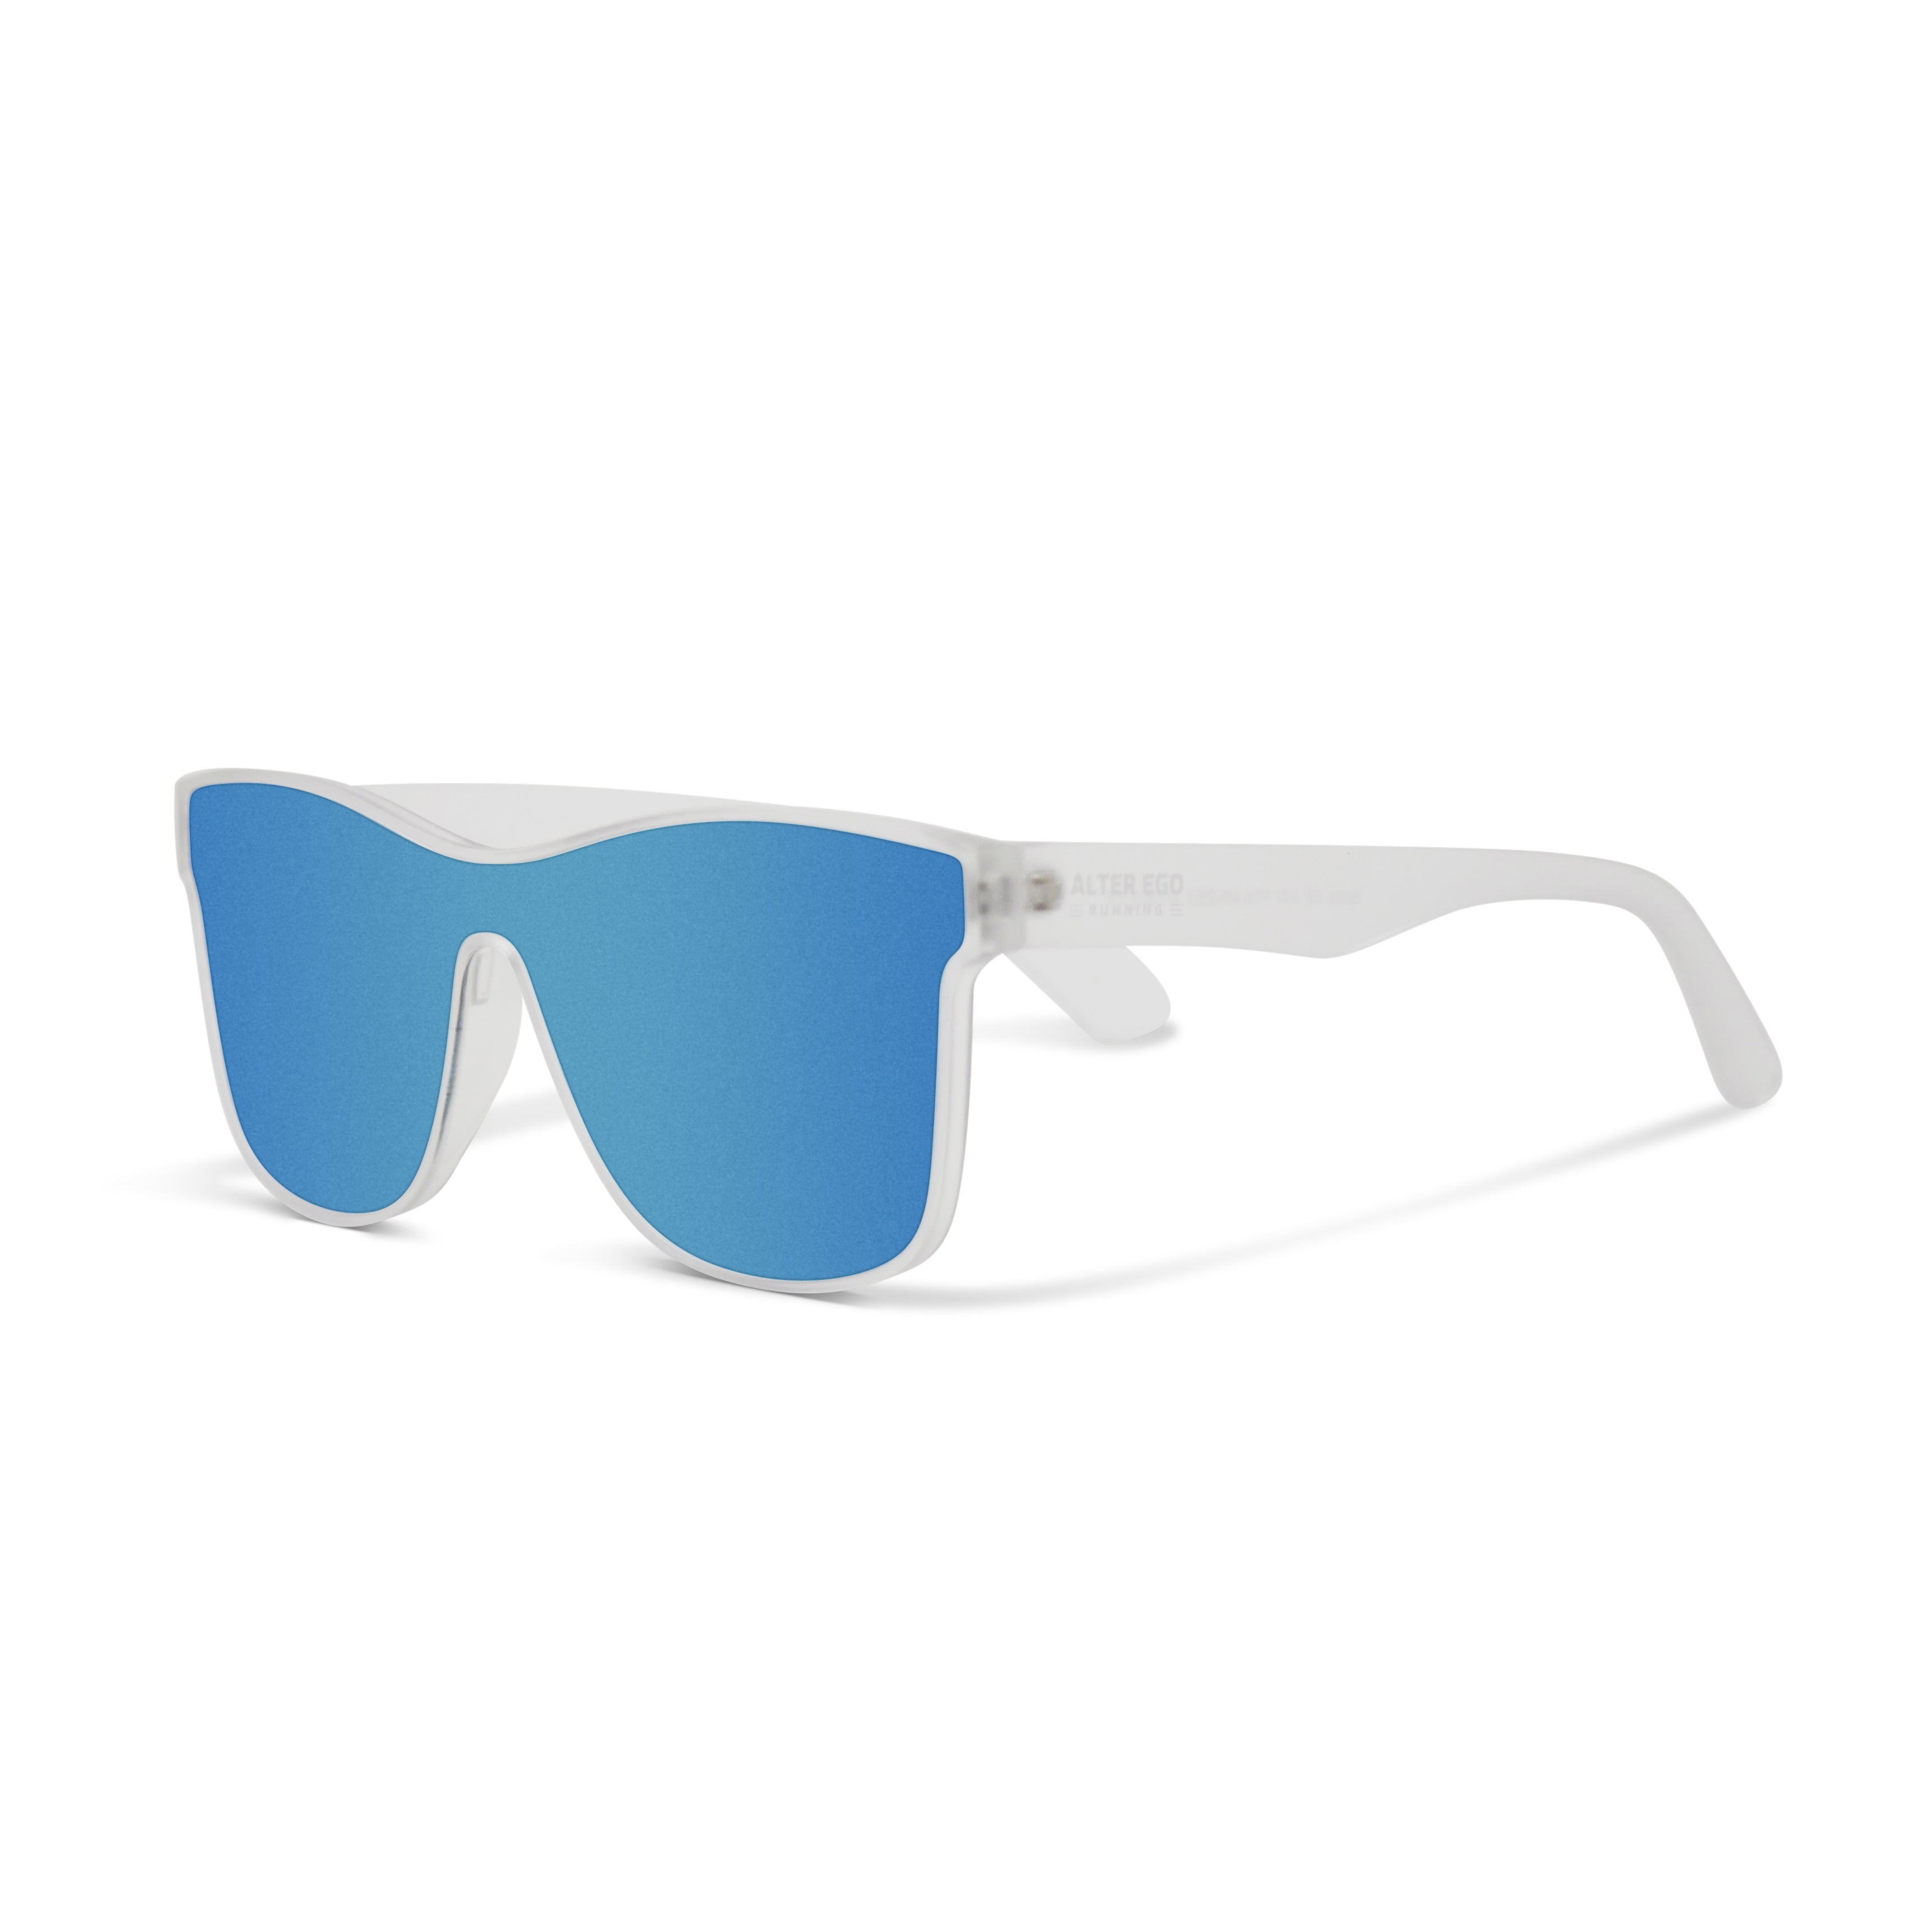 INFINITY - FROSTED CLEAR | BLUE POLARIZED LENS